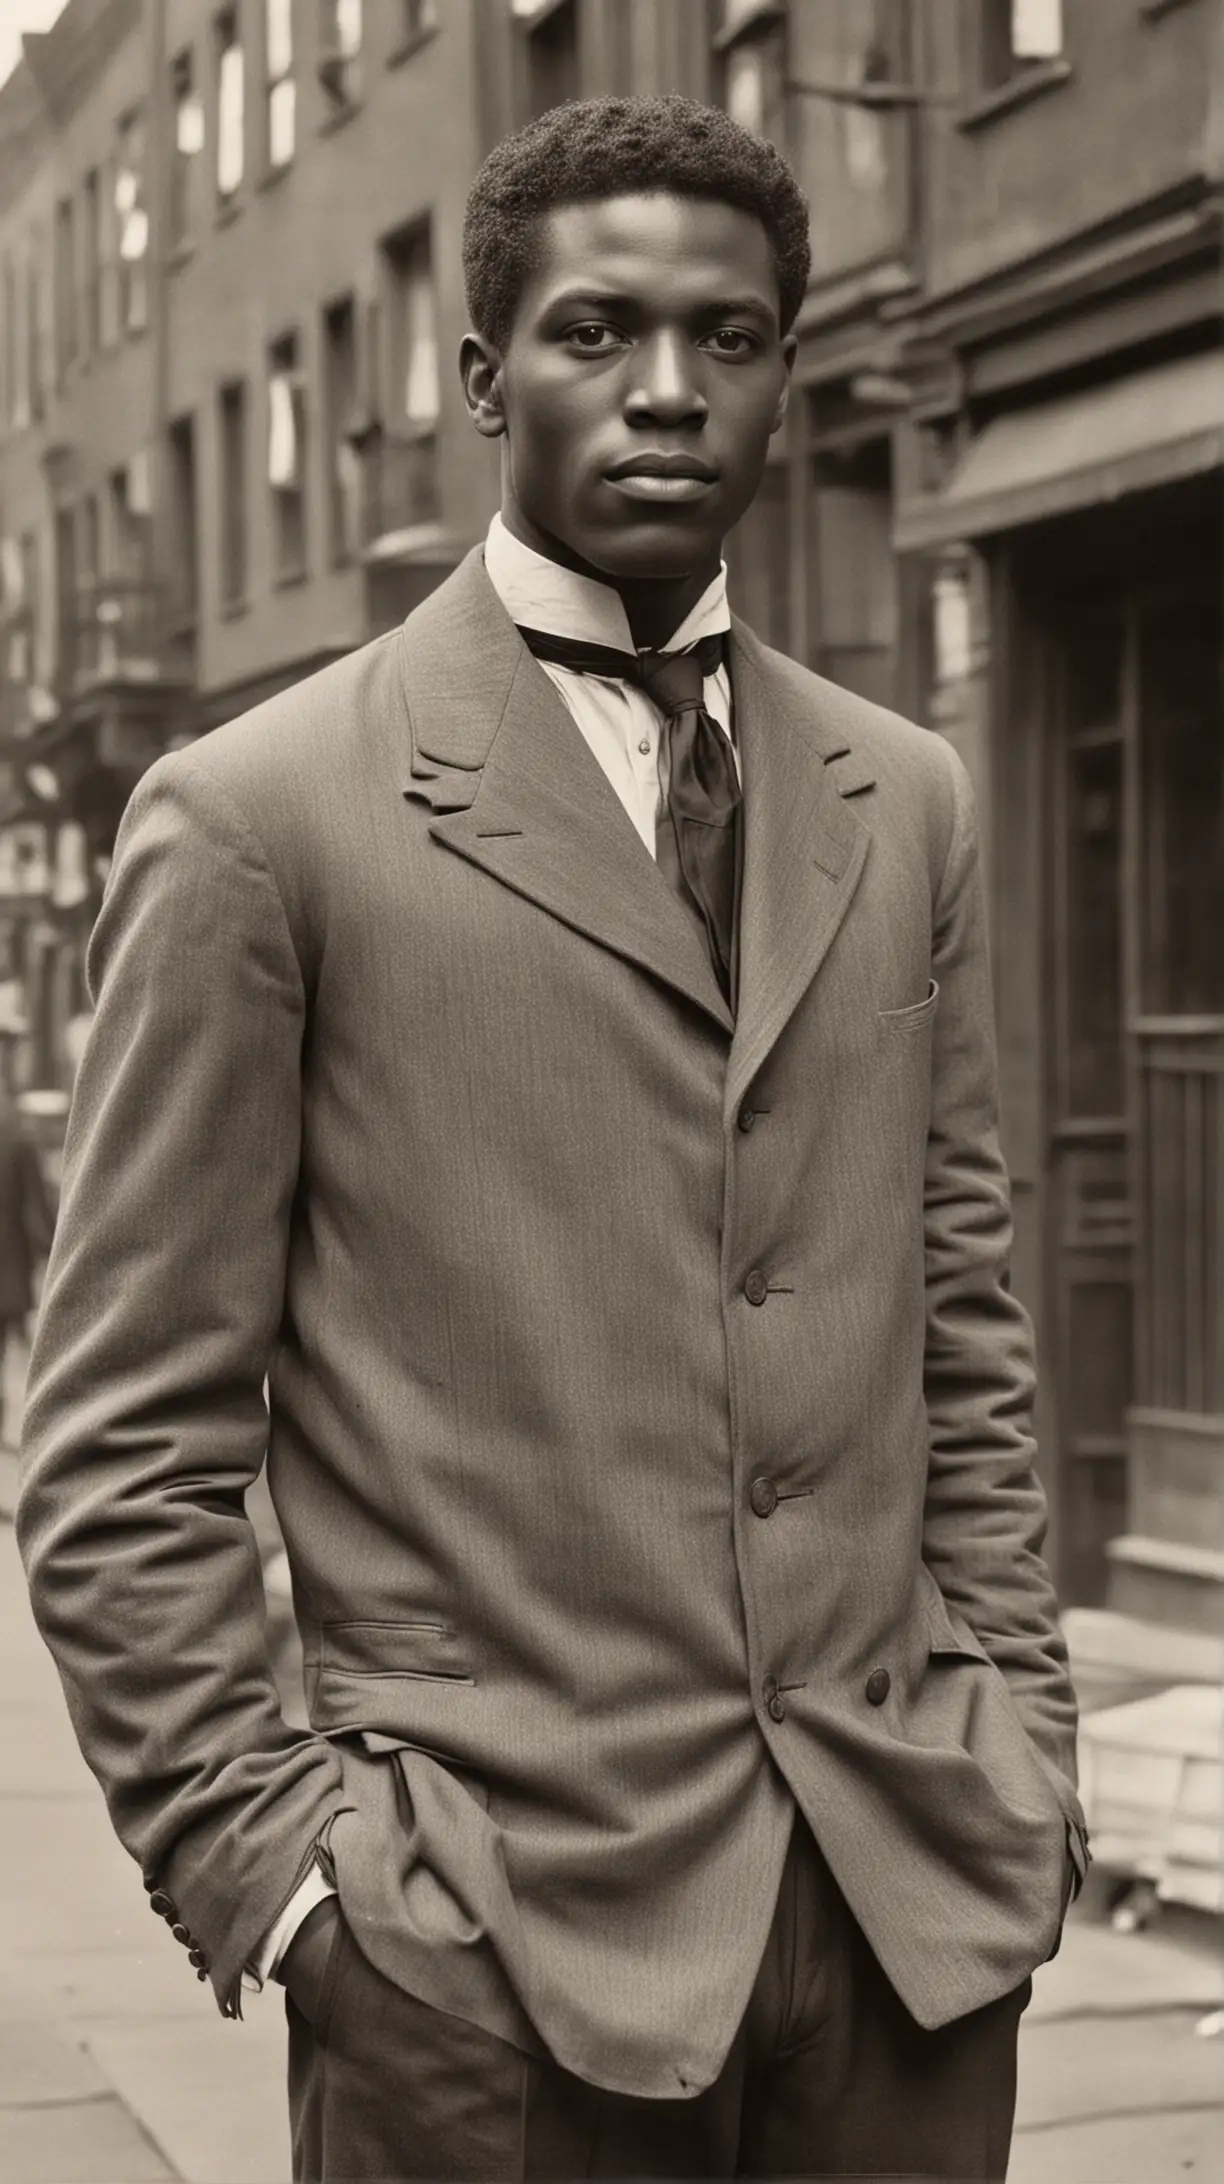 1900s, Handsome Black man with no mustache standing in the city.